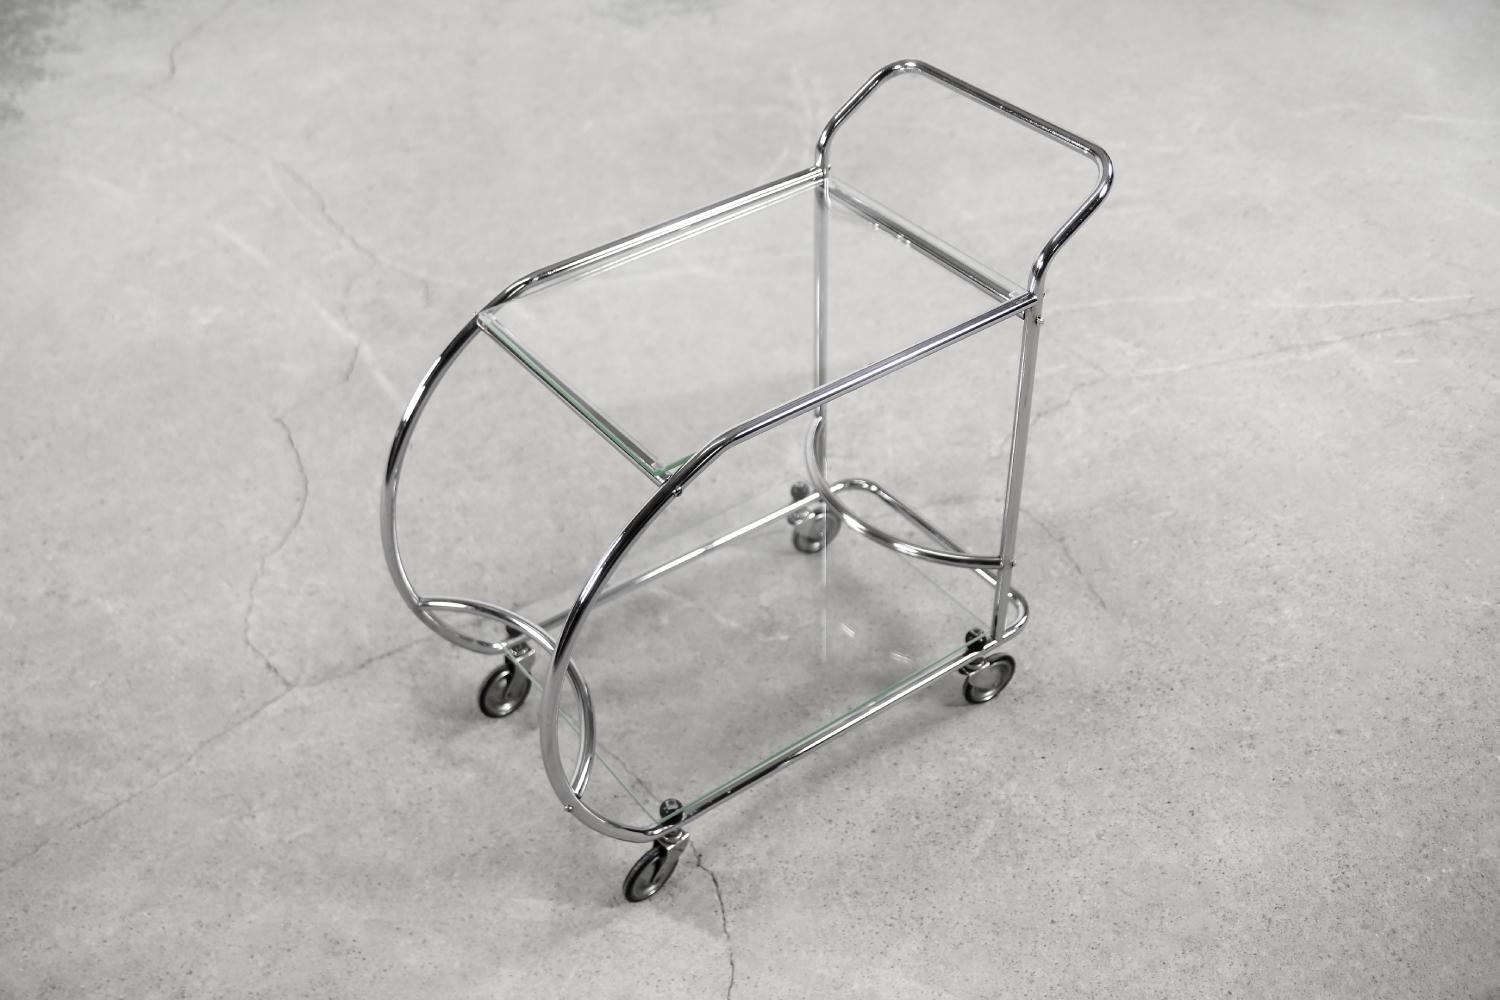 This small and light bar table was manufactured during the 1950s. Its form refers to the pre-war Art dèco style. The streamlined frame is made of chromed tubulars steel. There are transparent glass tops on two levels. Comfortable handle and wheels